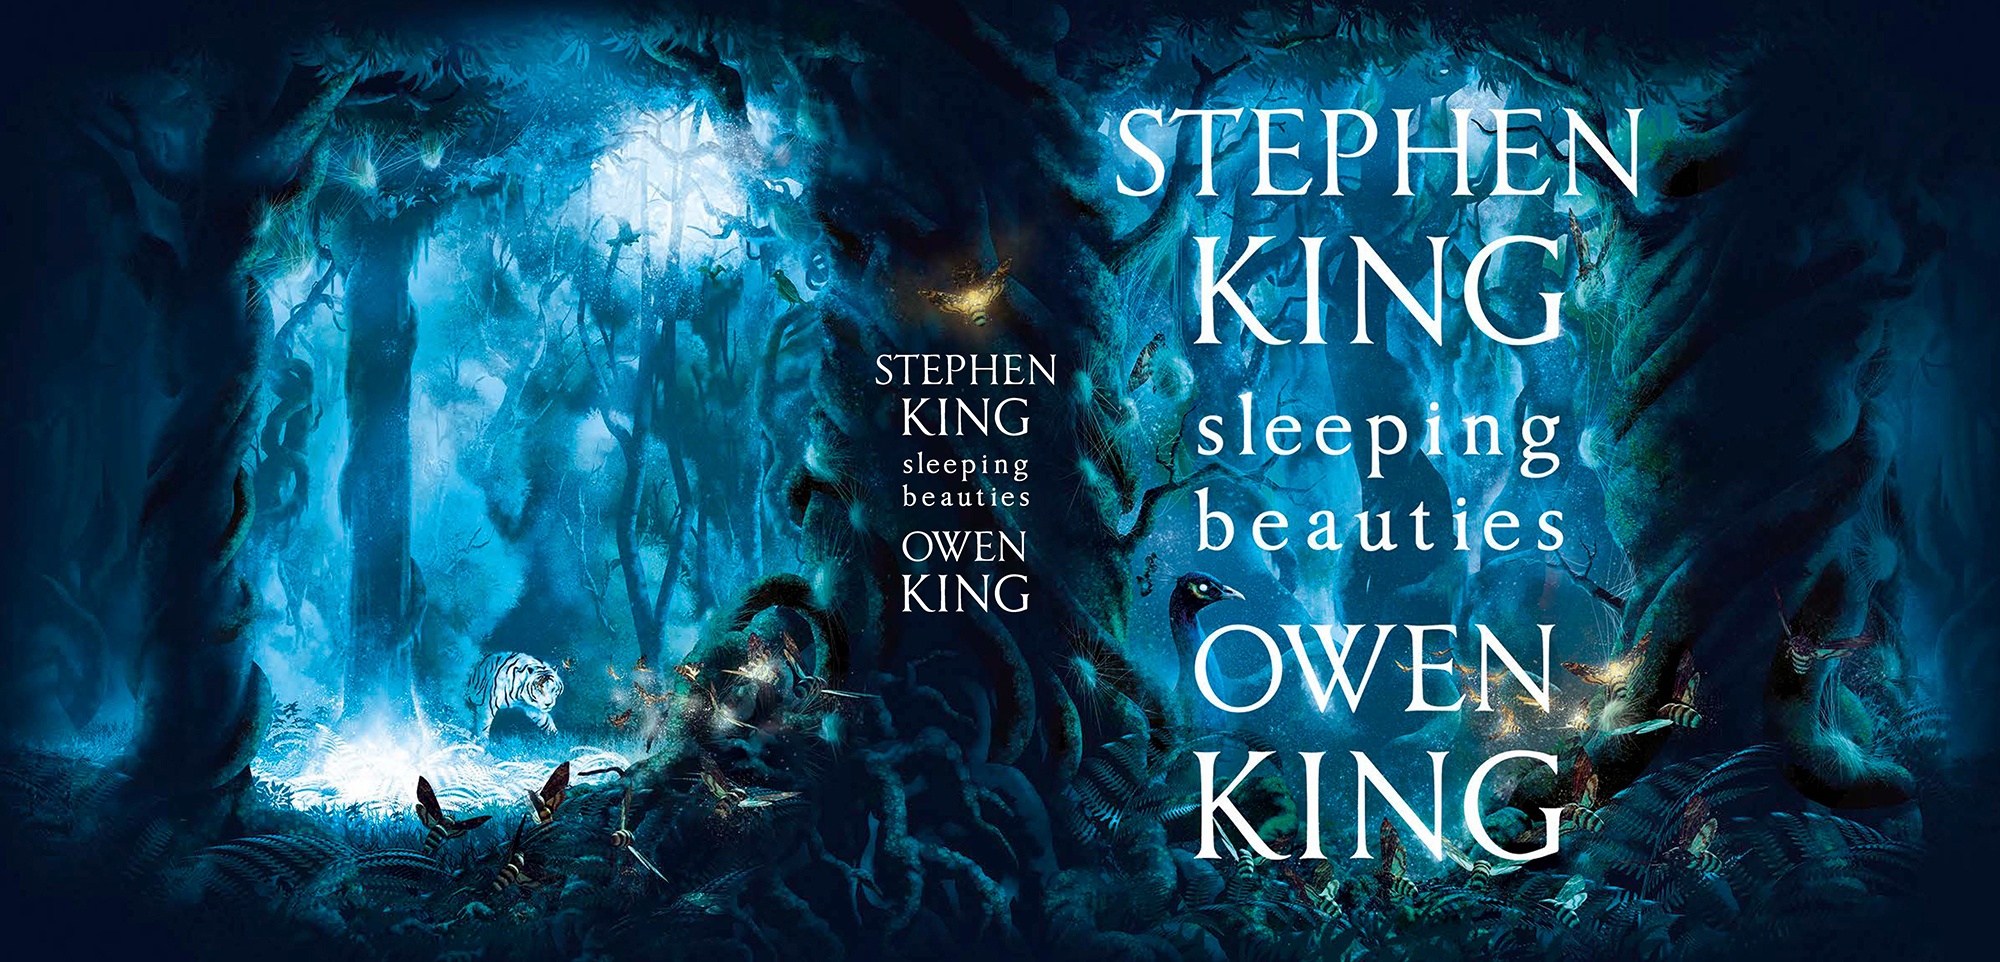 ann sturgess recommends Sleeping Beauties On Tumblr